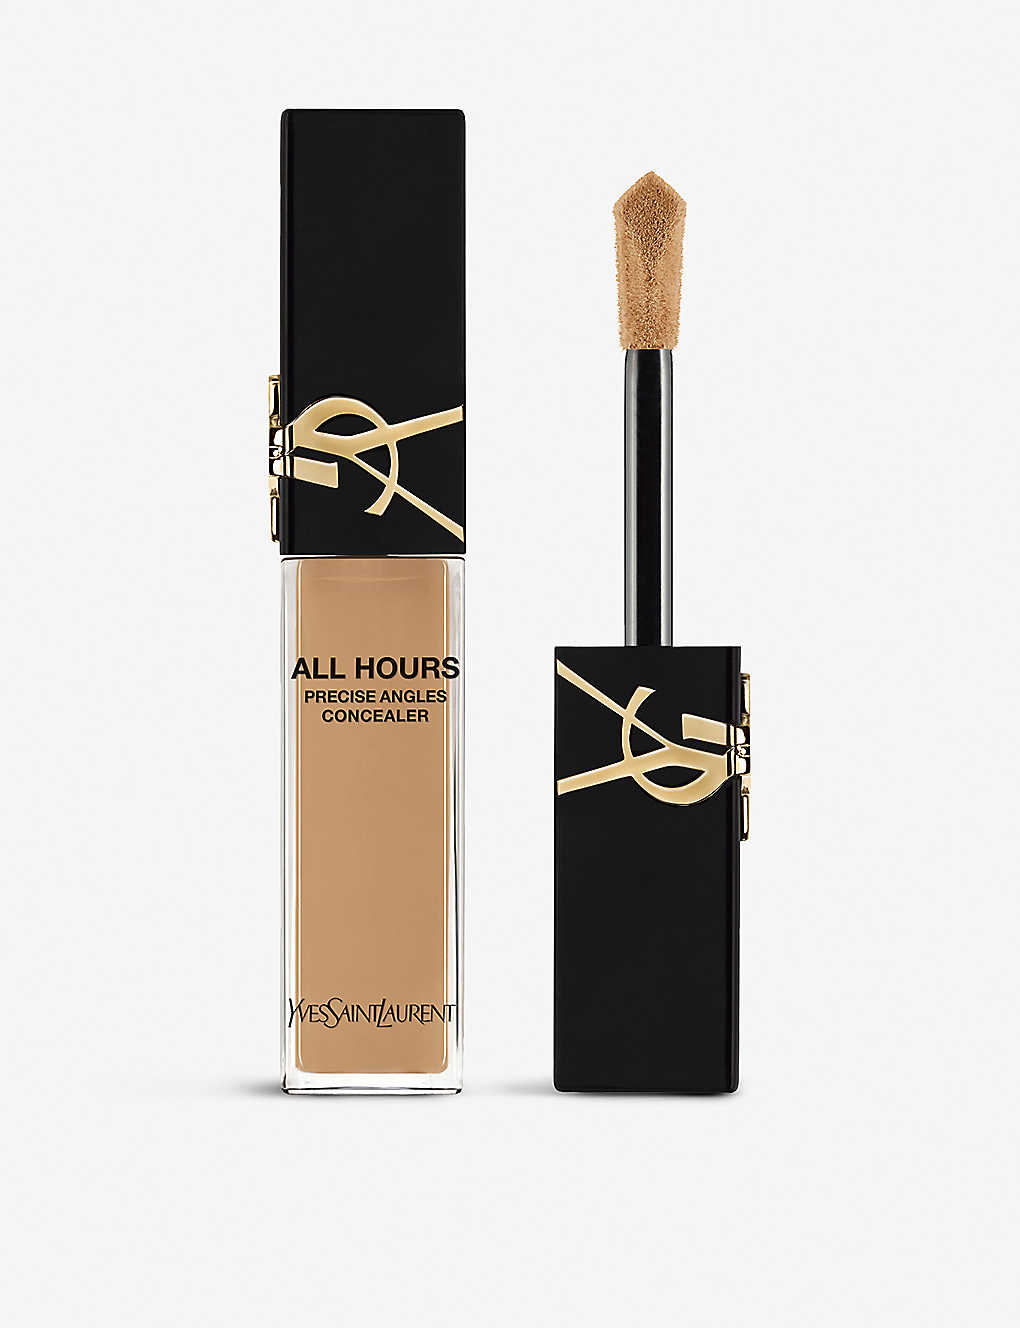 Saint Laurent Yves  Mn1 All Hours Precise Angles Concealer